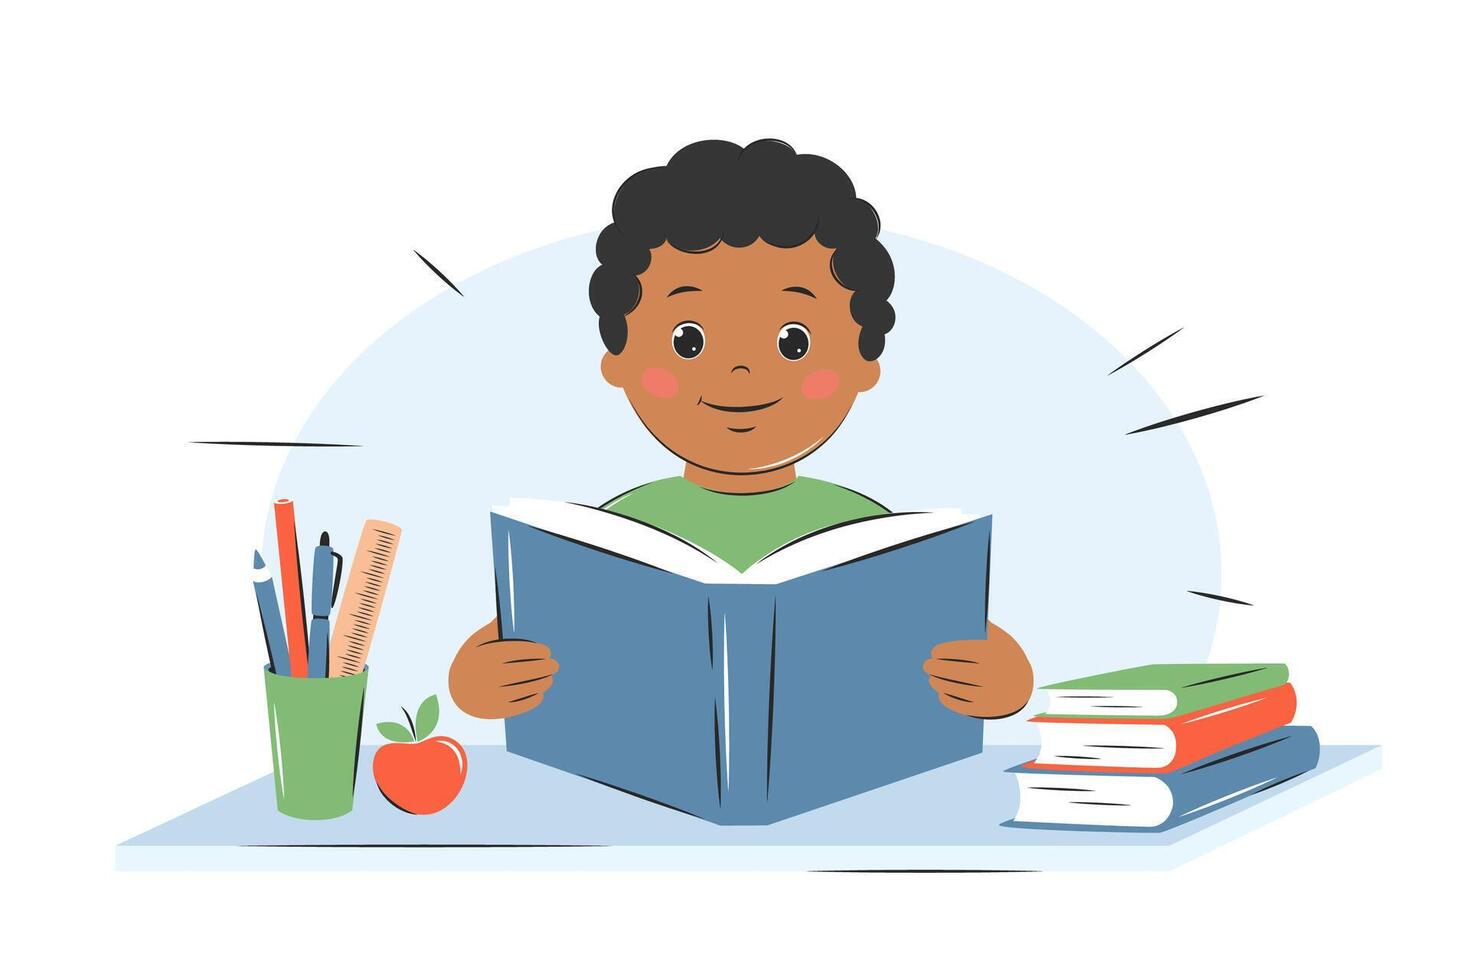 Schoolboy reading a book. Knowledge and education concept. Children study at school or at home. Vector illustration.